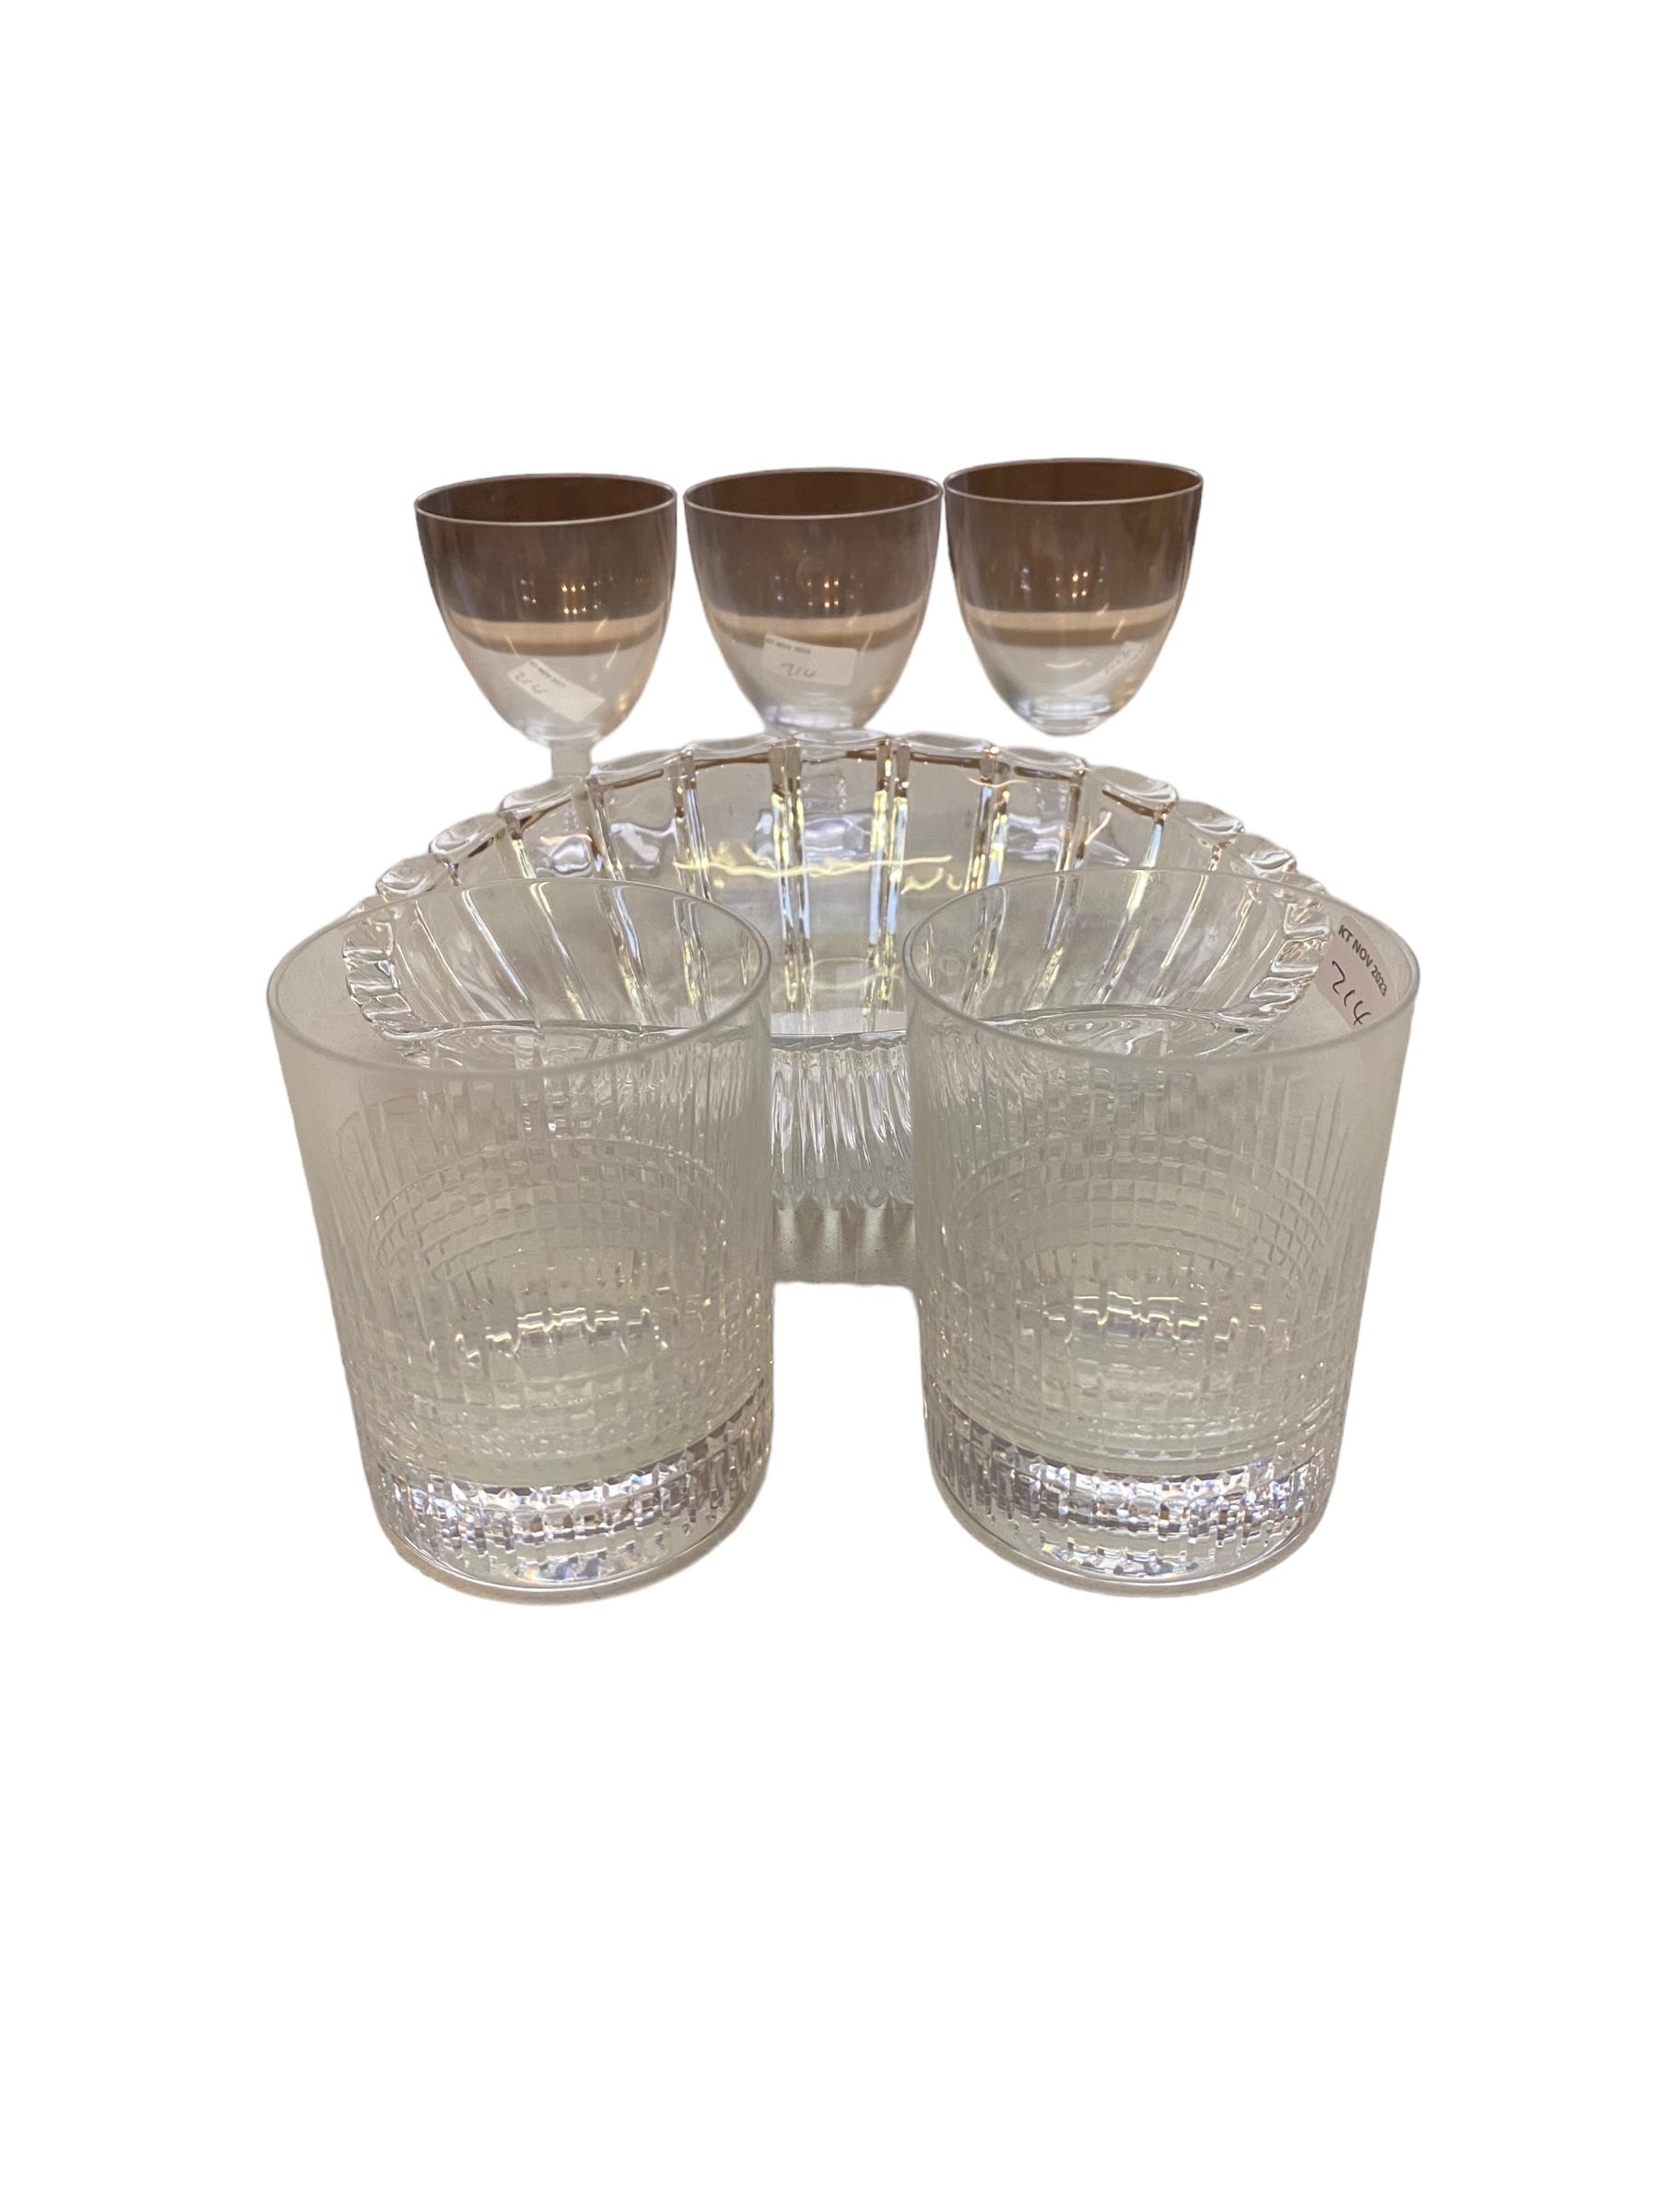 Pair of Baccarat tumblers, 3 Lalique wine glasses with square bases and a scallop dish